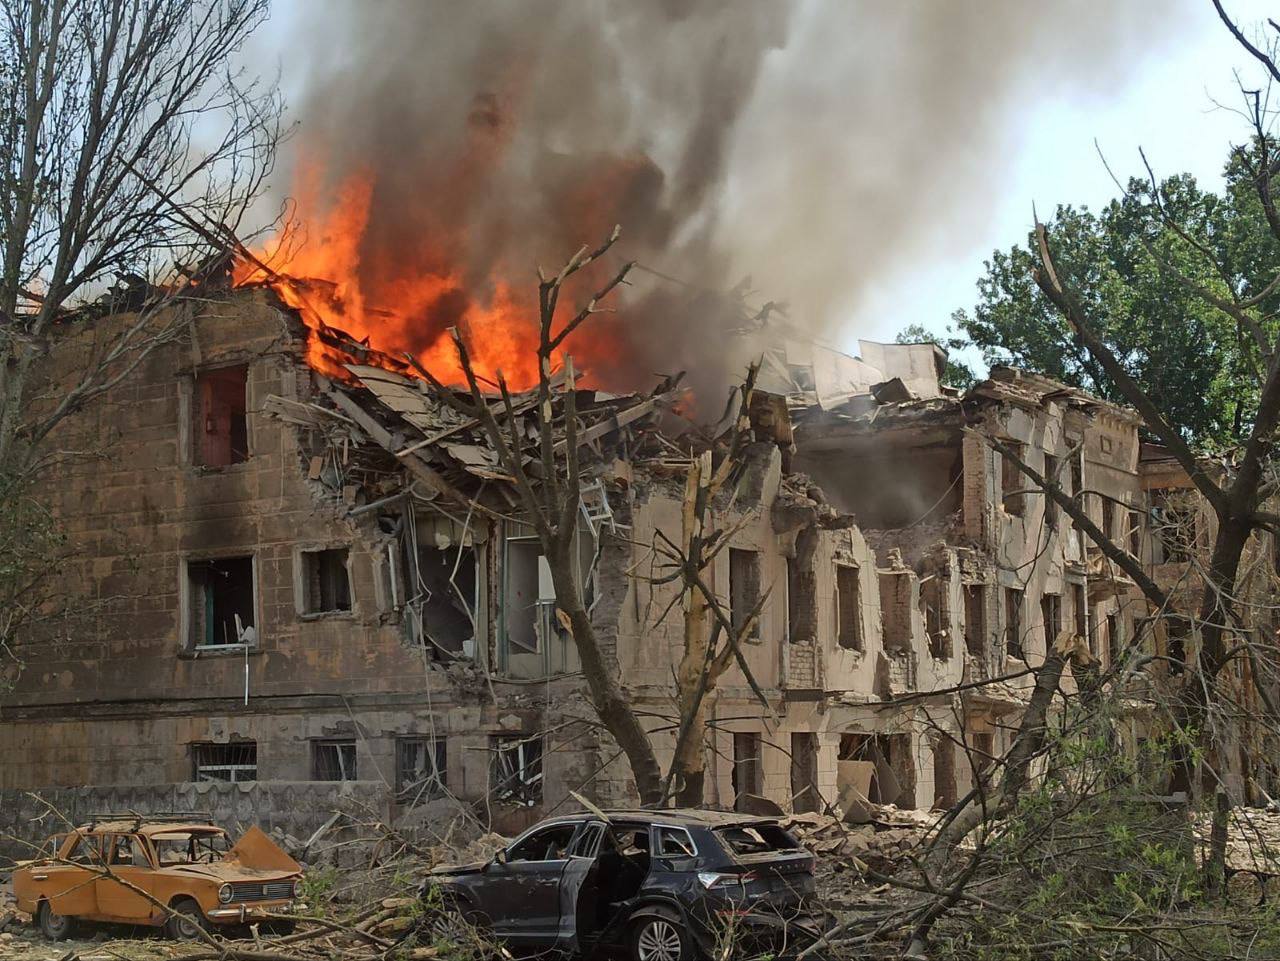 Russia carried out more than 1,000 attacks on Ukrainian health care facilities – W.H.O.